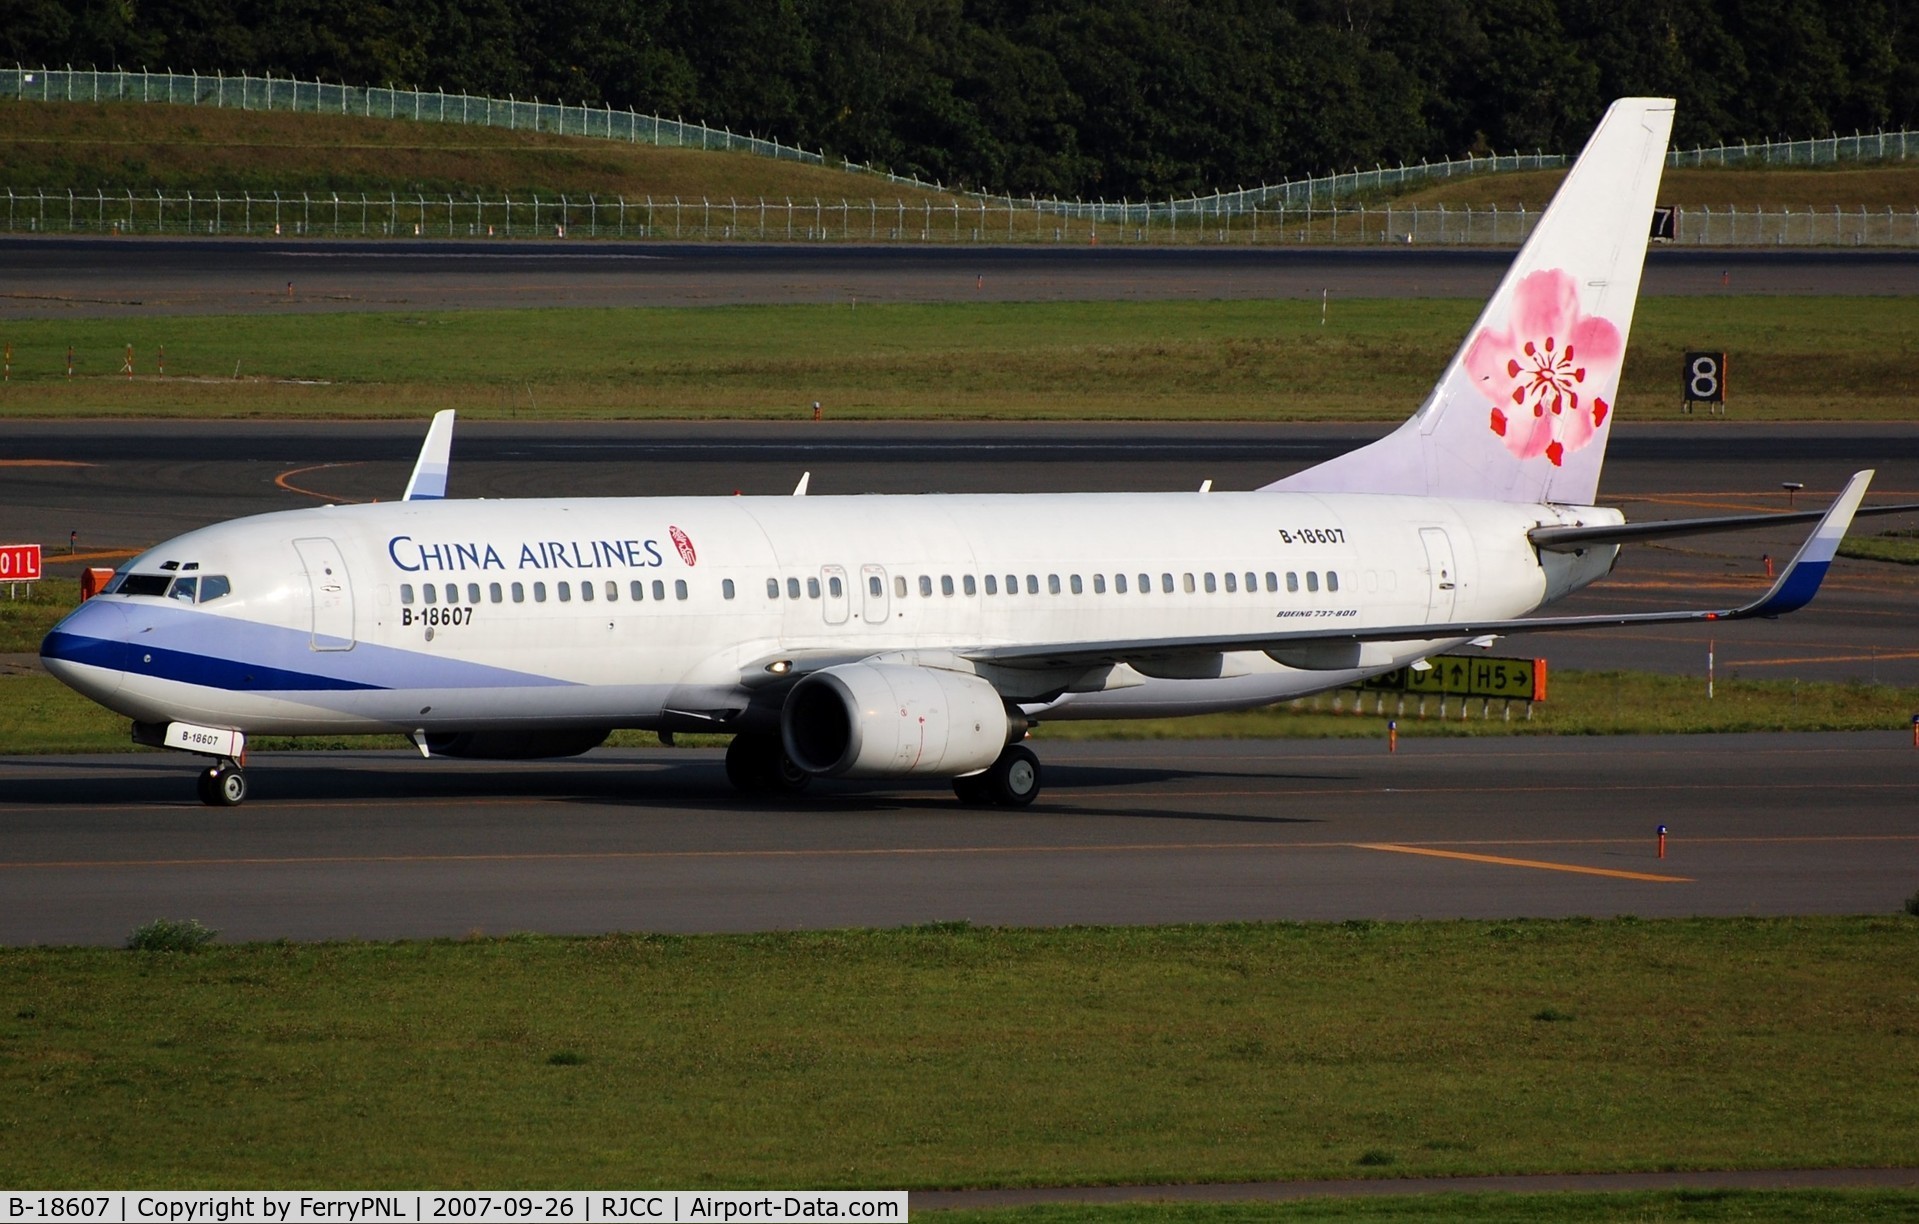 B-18607, Boeing 737-809 C/N 29104, Arrival of China Airlines B738